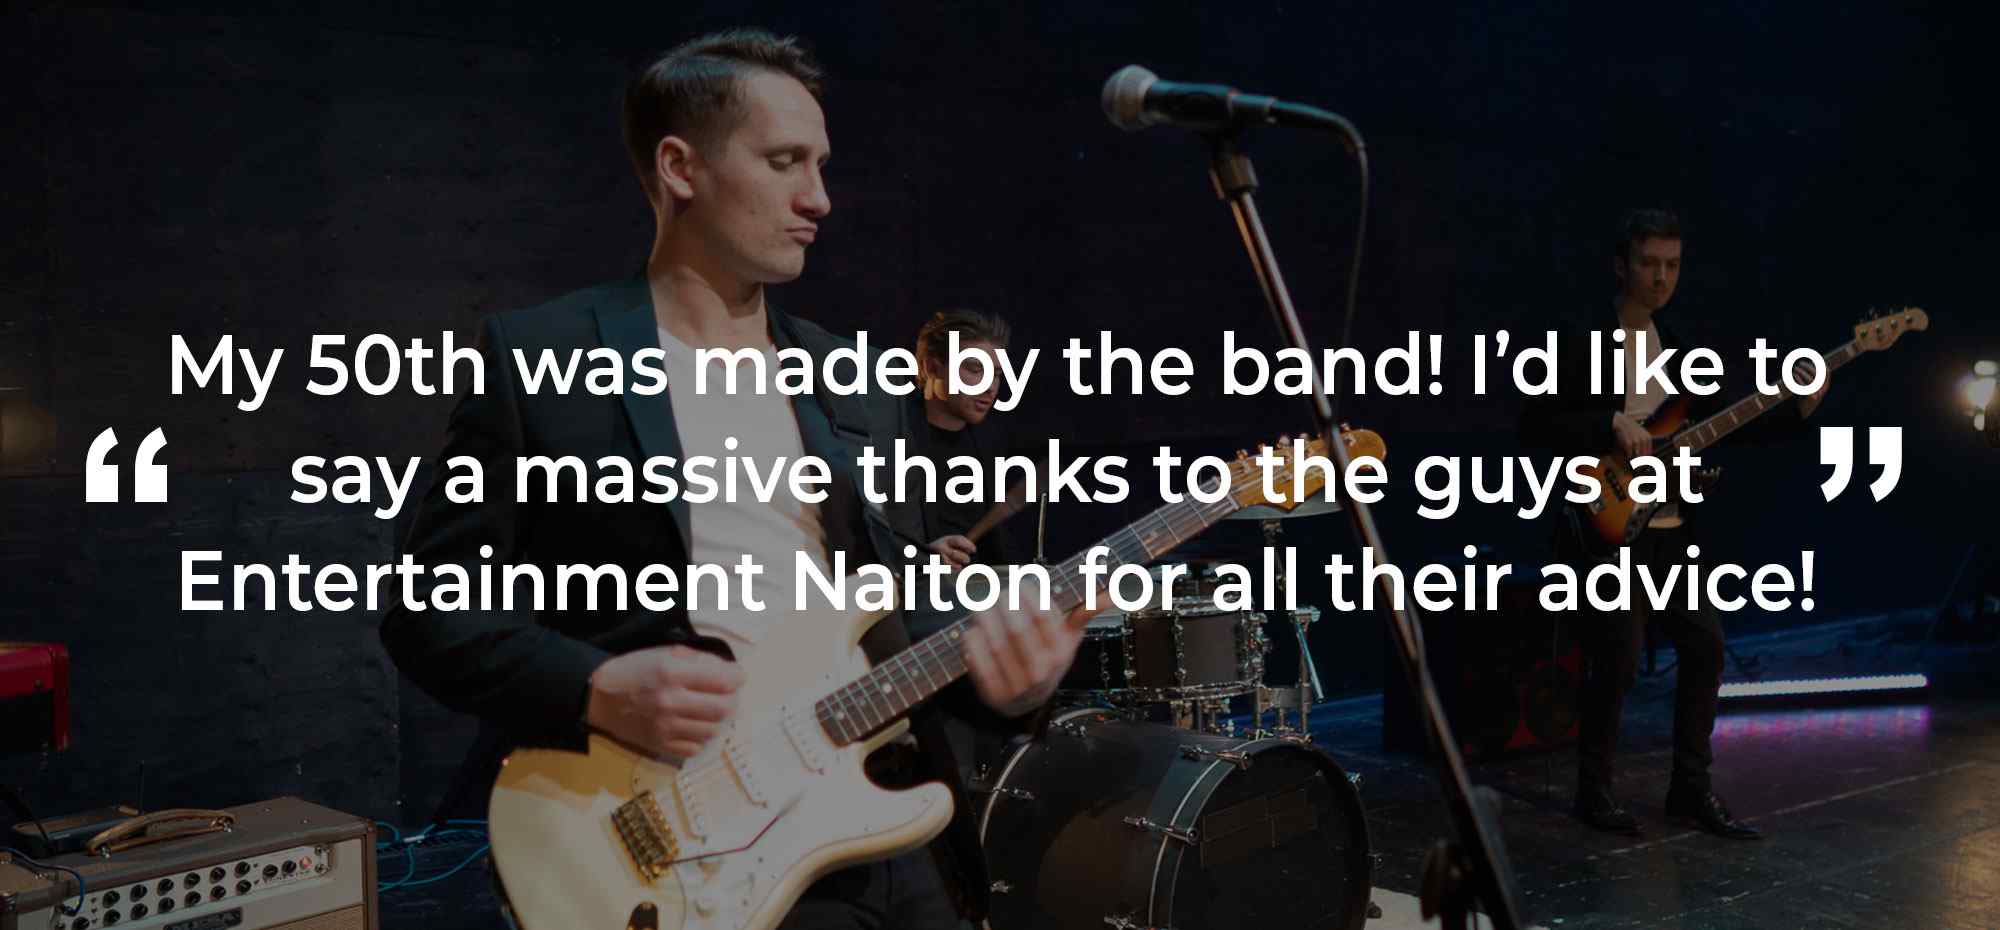 Client Review of a Party Band Herefordshire